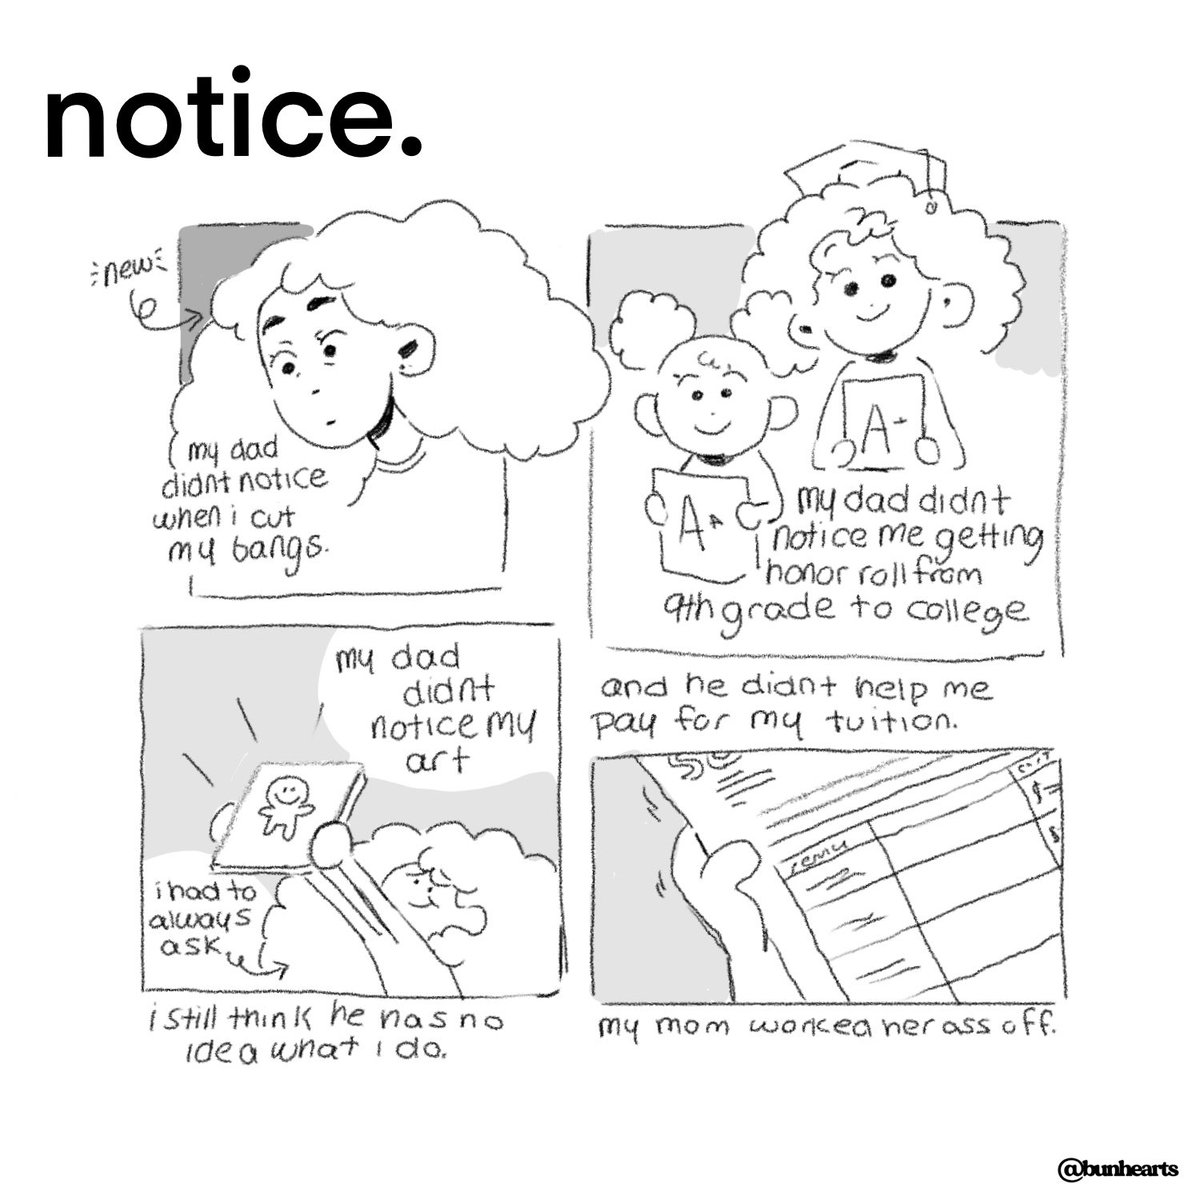 Notice: a comic about praise and who you care to get it from
(1/3) 